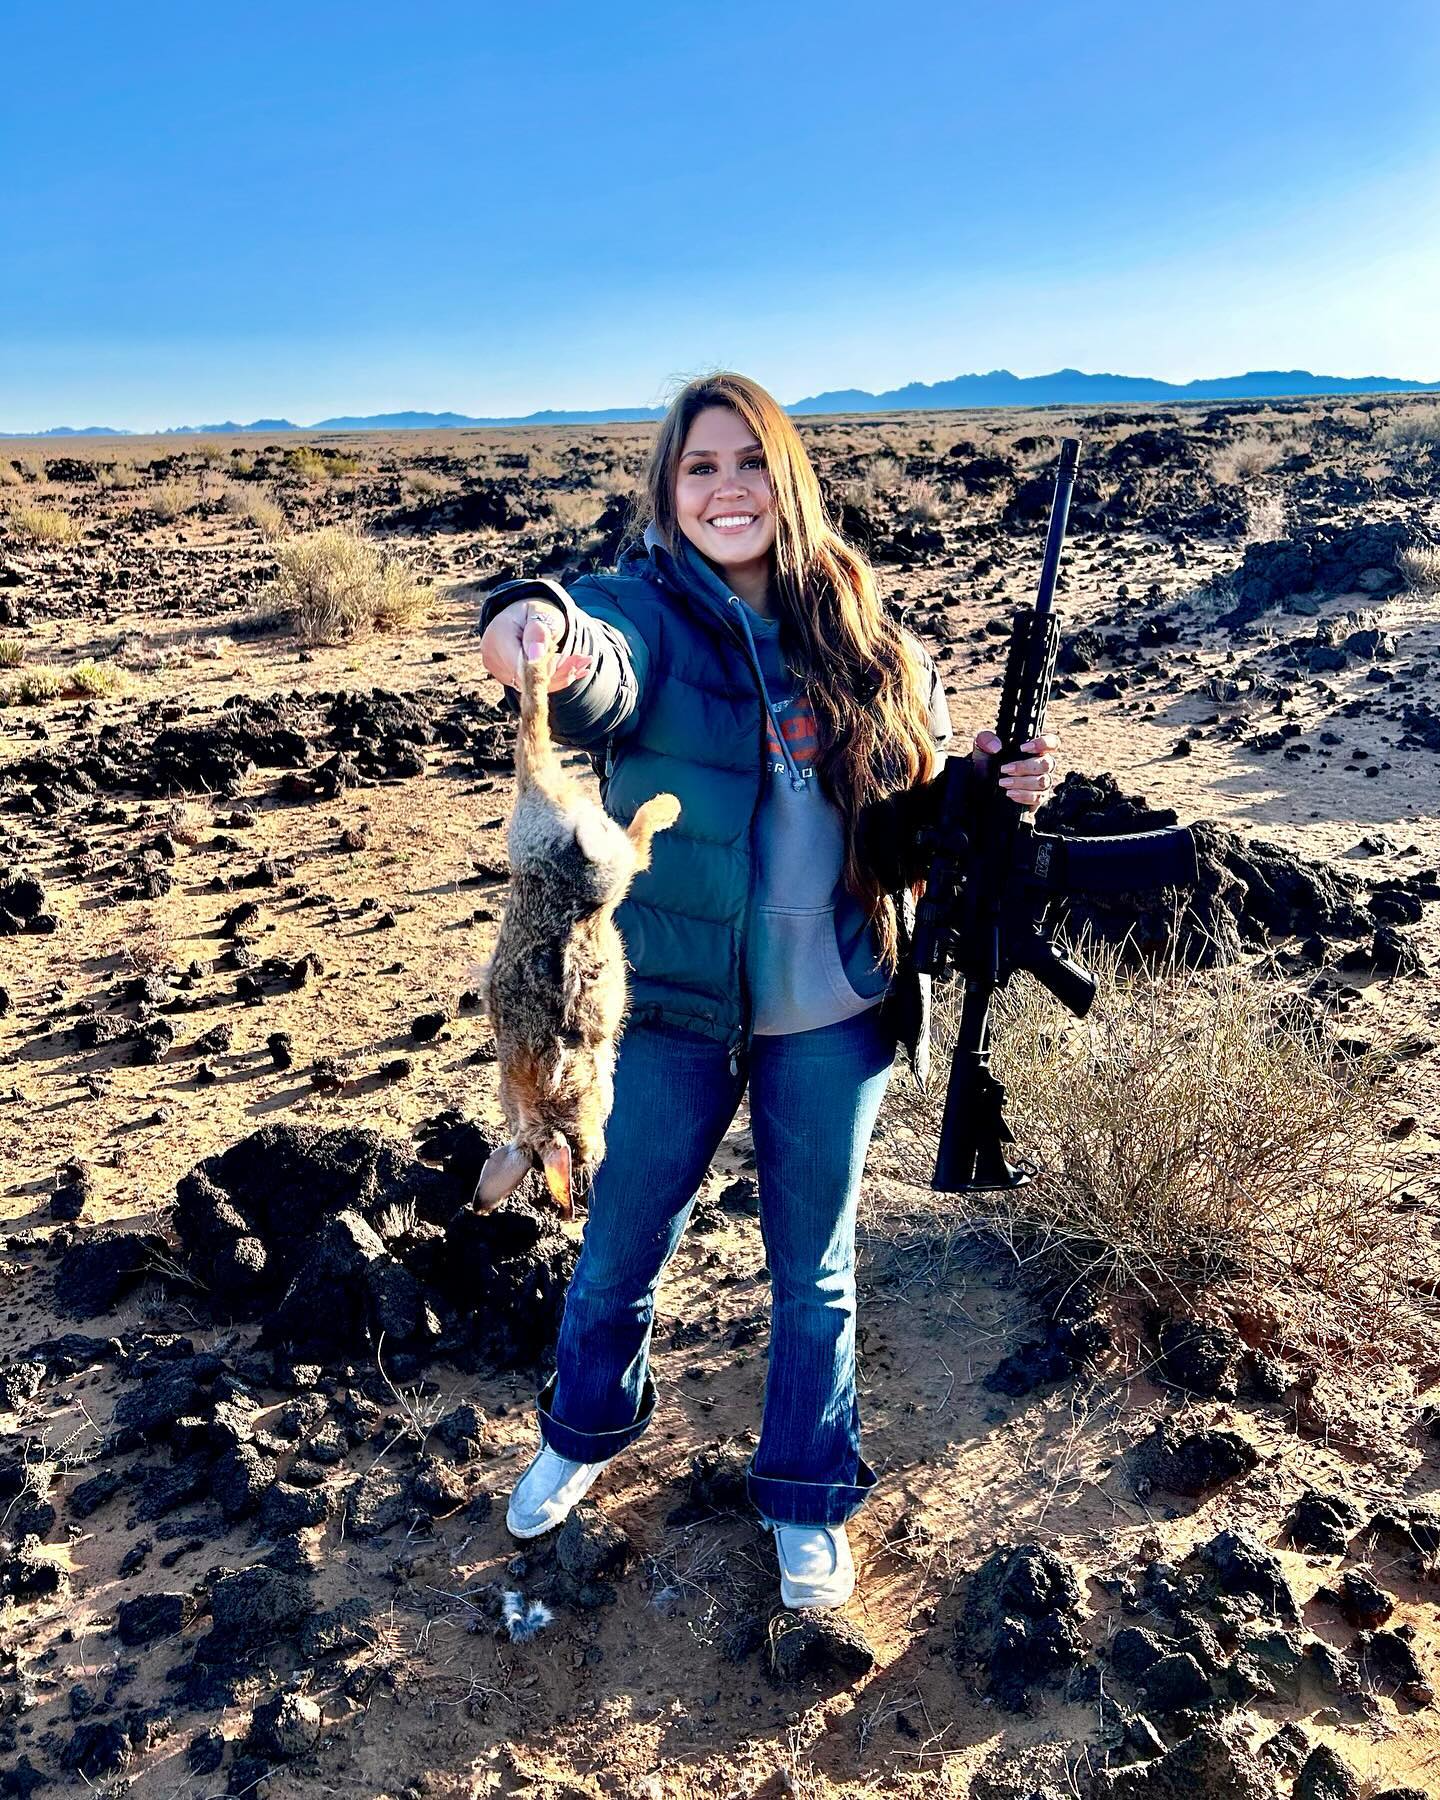 Didn’t kill a Javelina but I still got something so that’s all that matters 🫡 

#hunt #hunting #hunter #javelinahunting #rabbithunt #rabbithunting